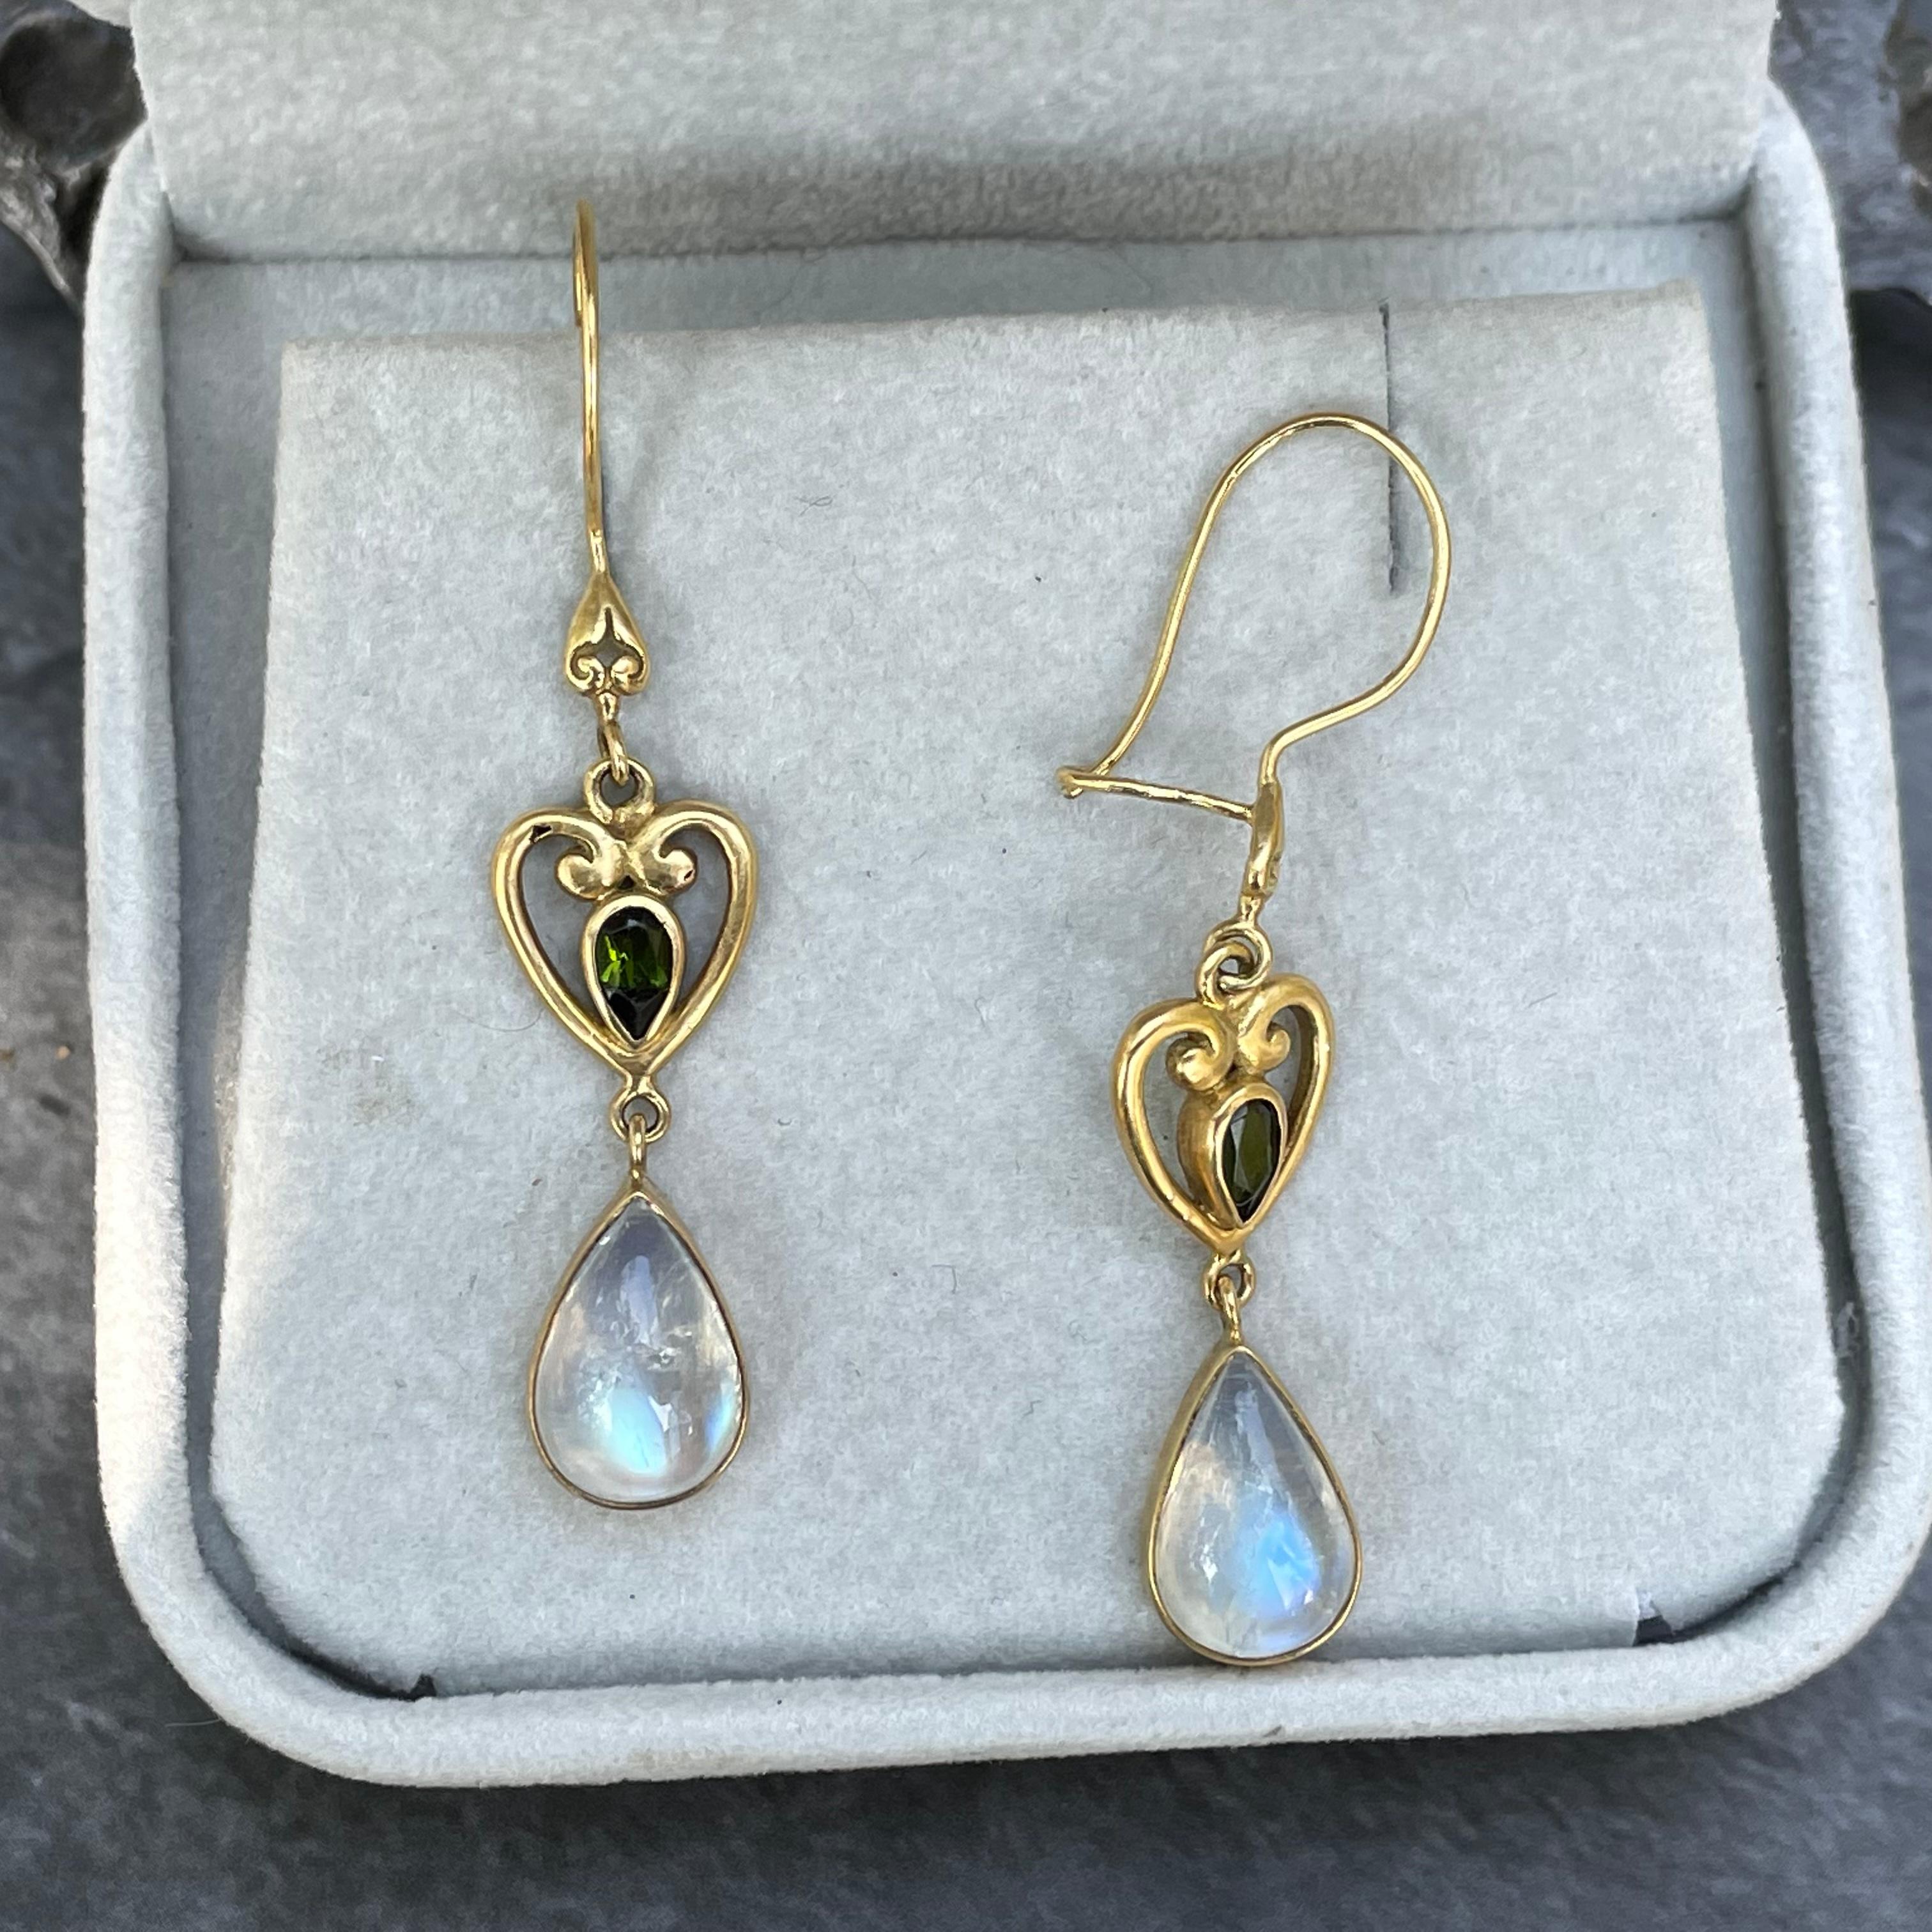 Steven Battelle 5.6 Carats Rainbow Moonstone Green Tourmaline 18K Gold Earrings In New Condition For Sale In Soquel, CA